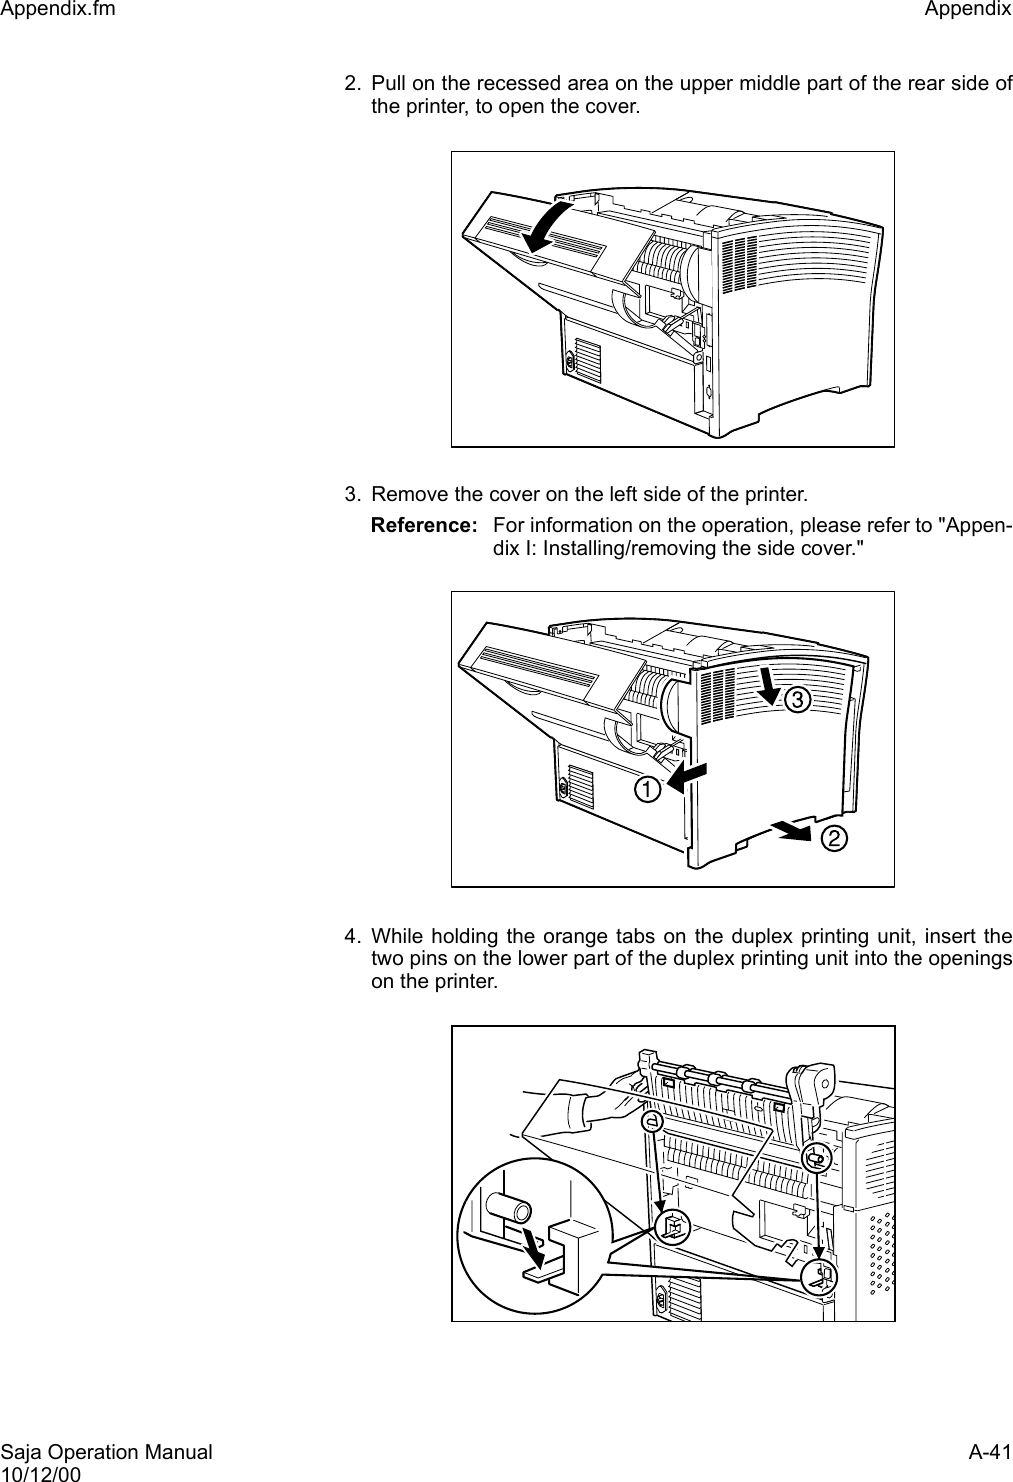 Saja Operation Manual A-4110/12/00Appendix.fm Appendix 2. Pull on the recessed area on the upper middle part of the rear side ofthe printer, to open the cover. 3. Remove the cover on the left side of the printer.Reference: For information on the operation, please refer to &quot;Appen-dix I: Installing/removing the side cover.&quot;4. While holding the orange tabs on the duplex printing unit, insert thetwo pins on the lower part of the duplex printing unit into the openingson the printer.